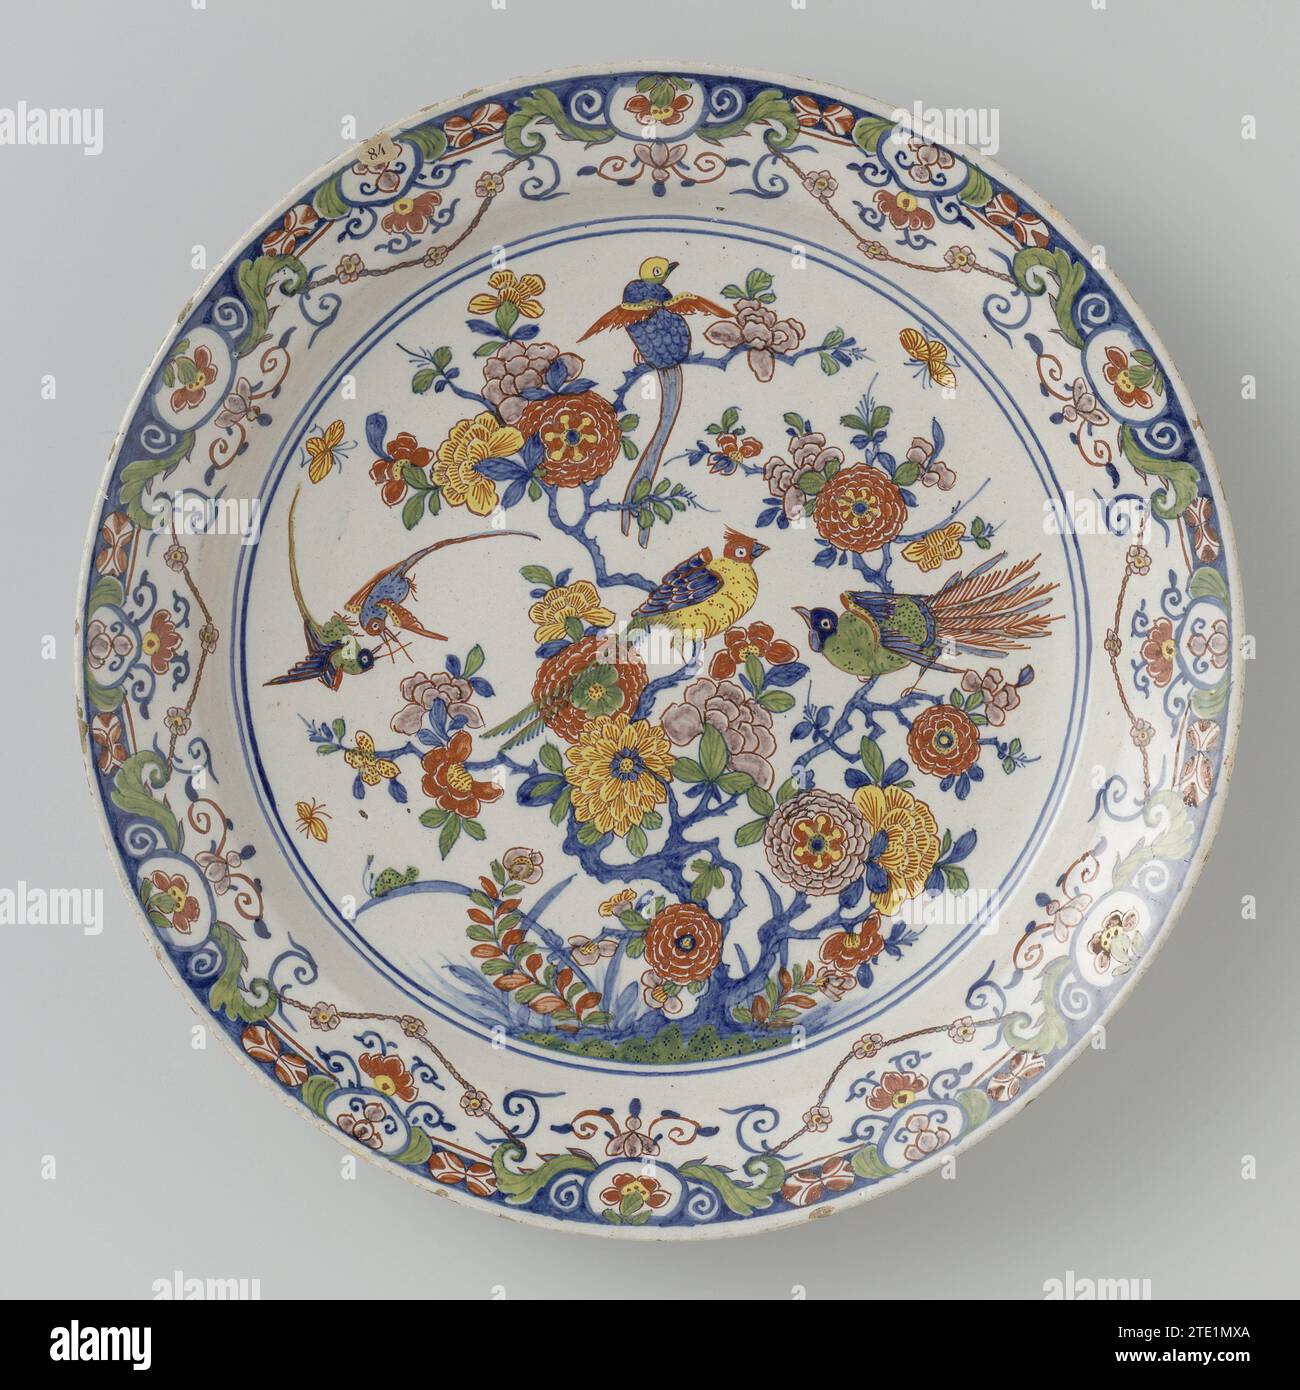 Saucer, multi -colored painted with chinoiserie, anonymous, c. 1715 - c. 1740 Dish of Faïence, multicolored painted with chinoiserie: on the flat a flower with birds. Rand of lambrequins. Delft . Dish of Faïence, multicolored painted with chinoiserie: on the flat a flower with birds. Rand of lambrequins. Delft . Stock Photo